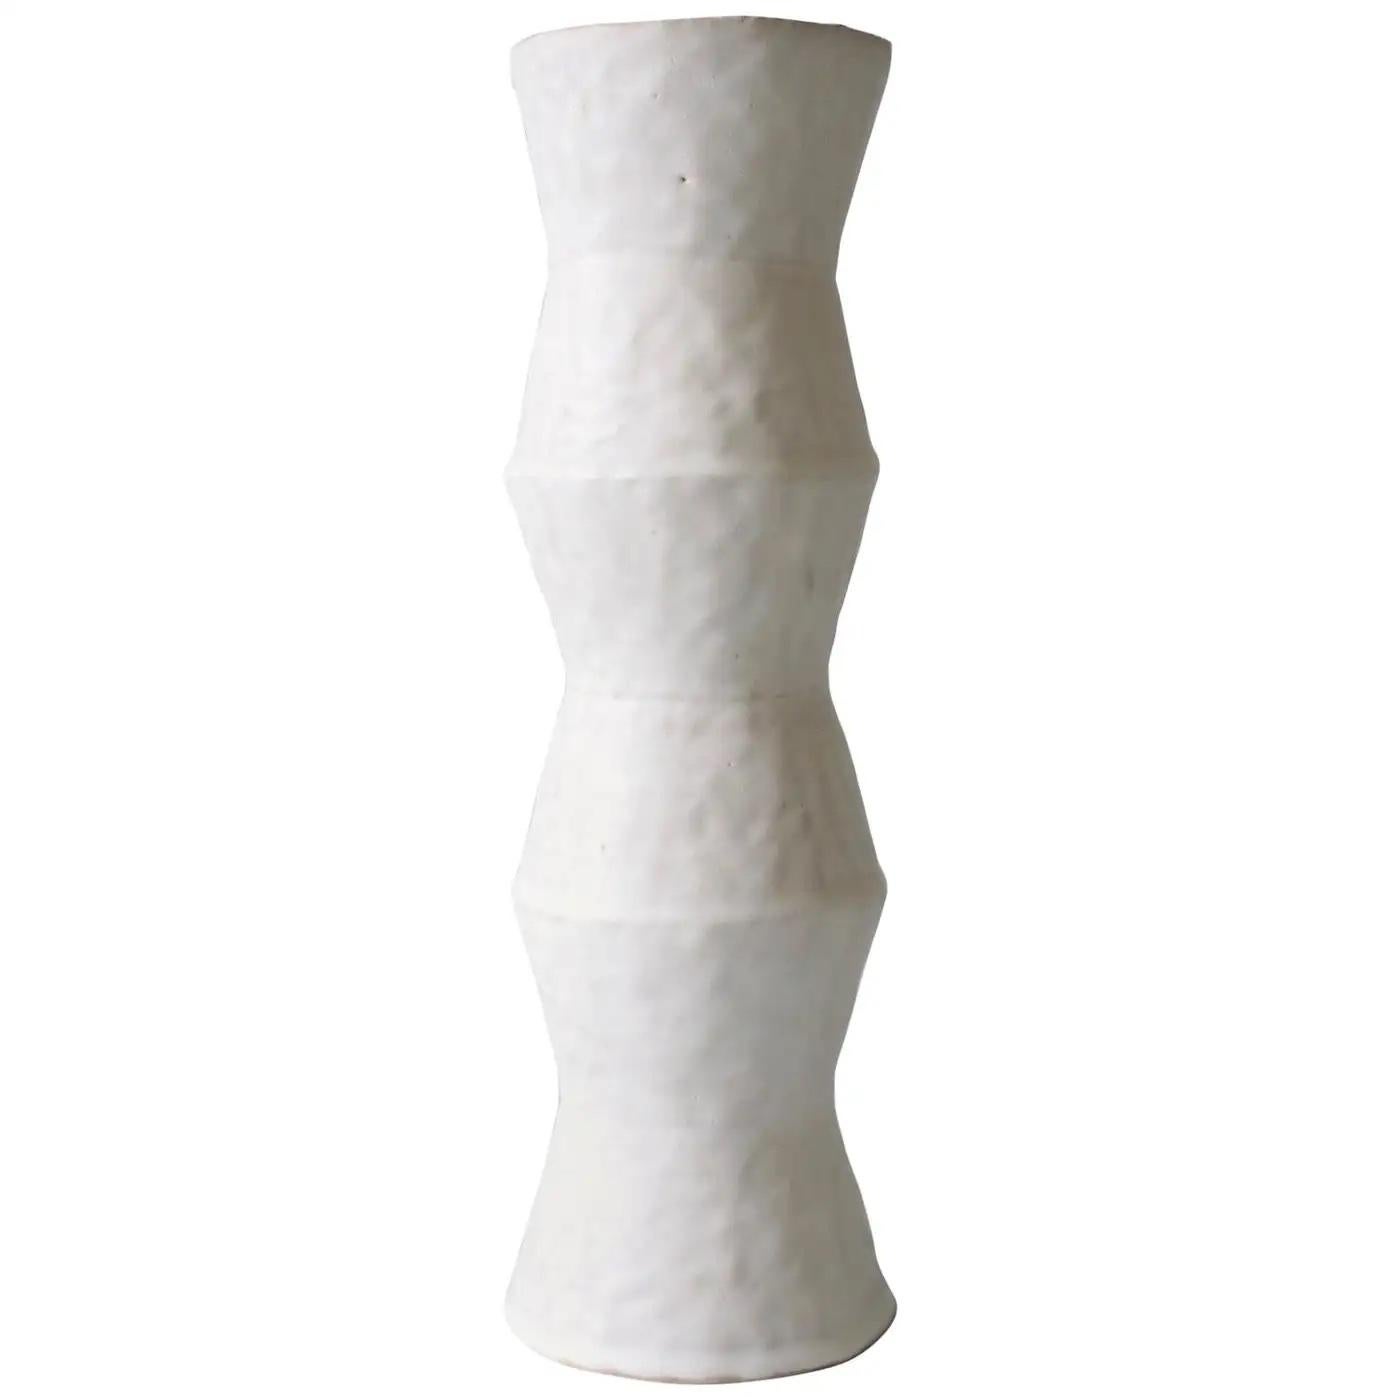 Giselle Hicks Contemporary White Ceramic Vase, 2019 In New Condition For Sale In New York, NY